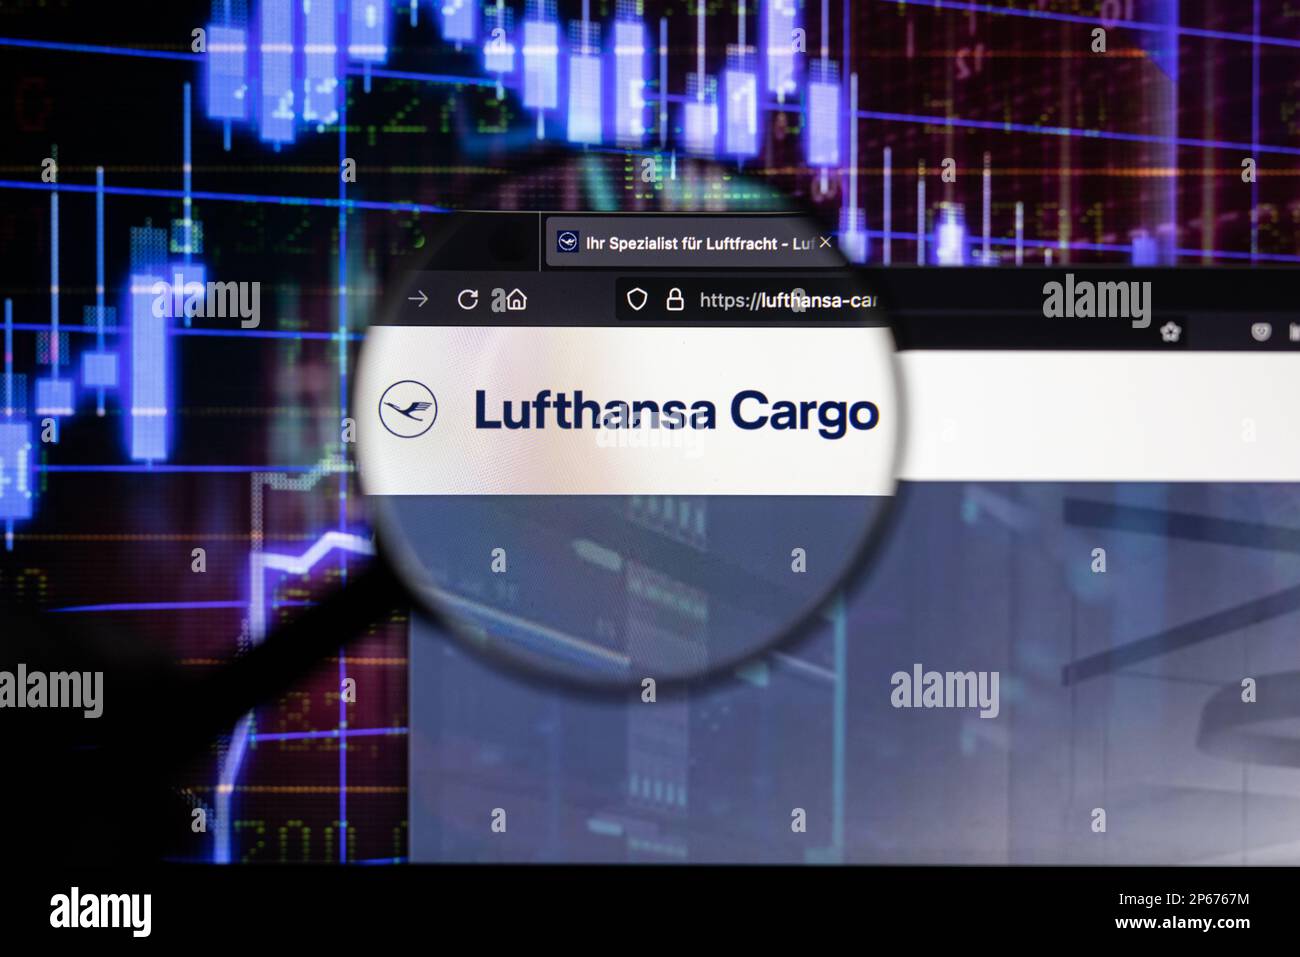 Lufthansa Cargo company logo on a website with blurry stock market developments in the background, seen on a screen through a magnifying glass Stock Photo